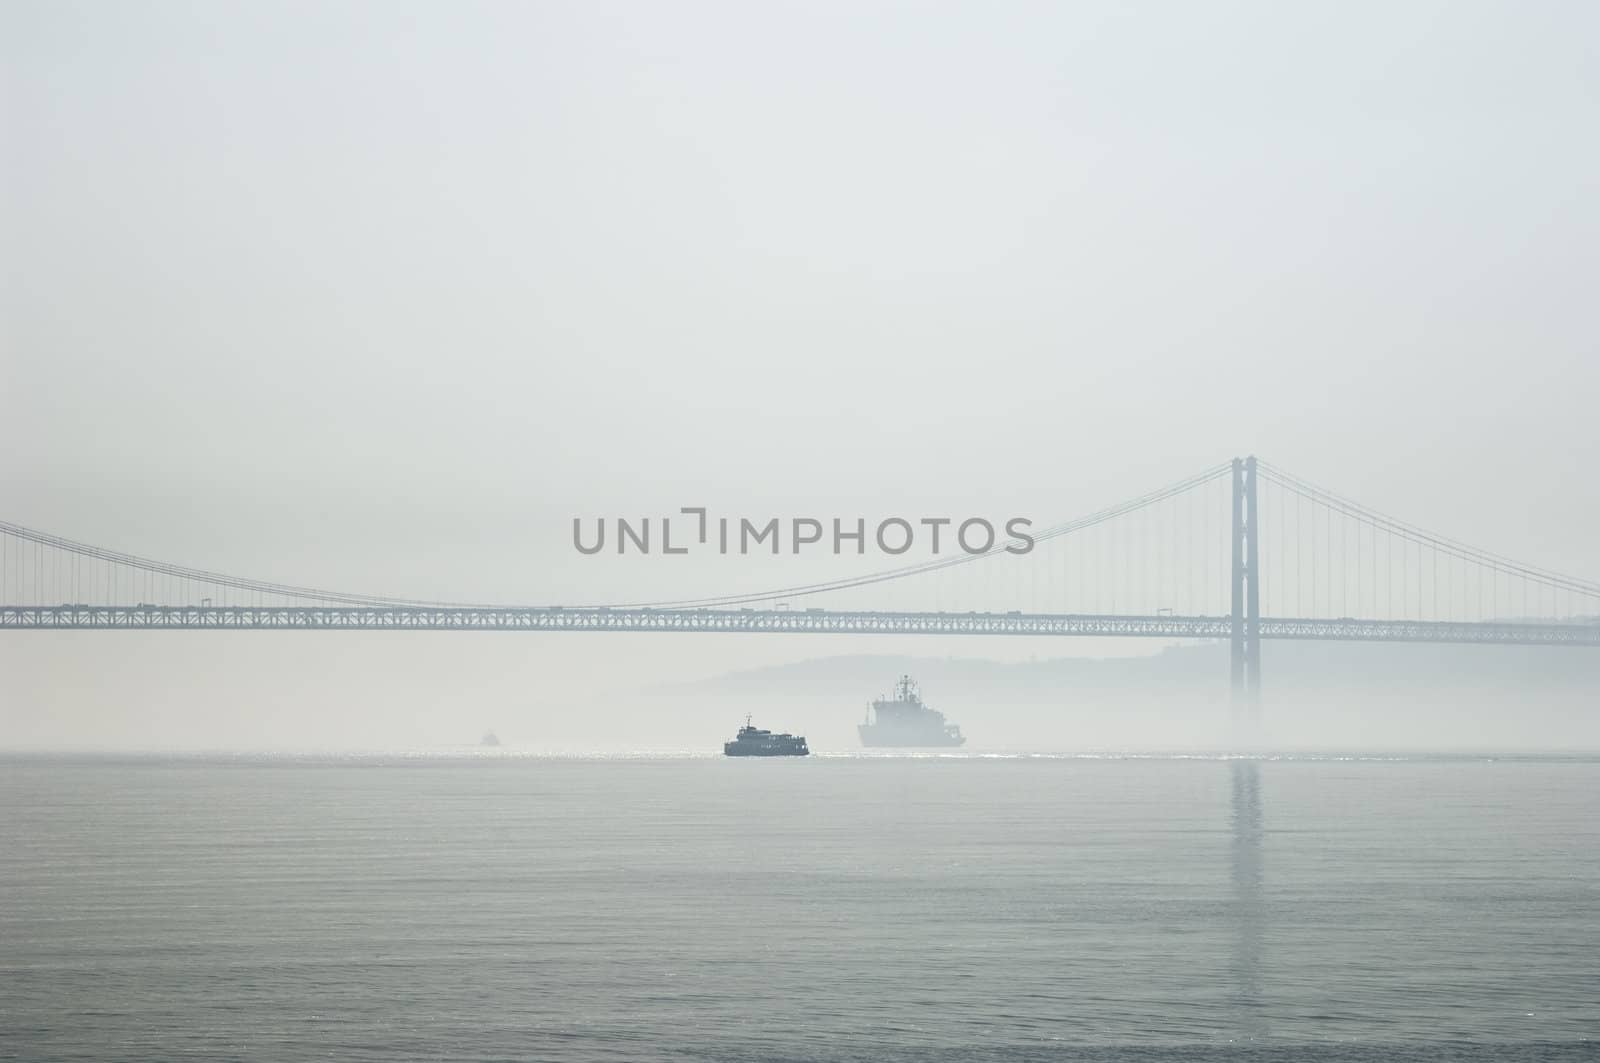 Ferrys crossing the Tagus river in a foggy morning by mrfotos